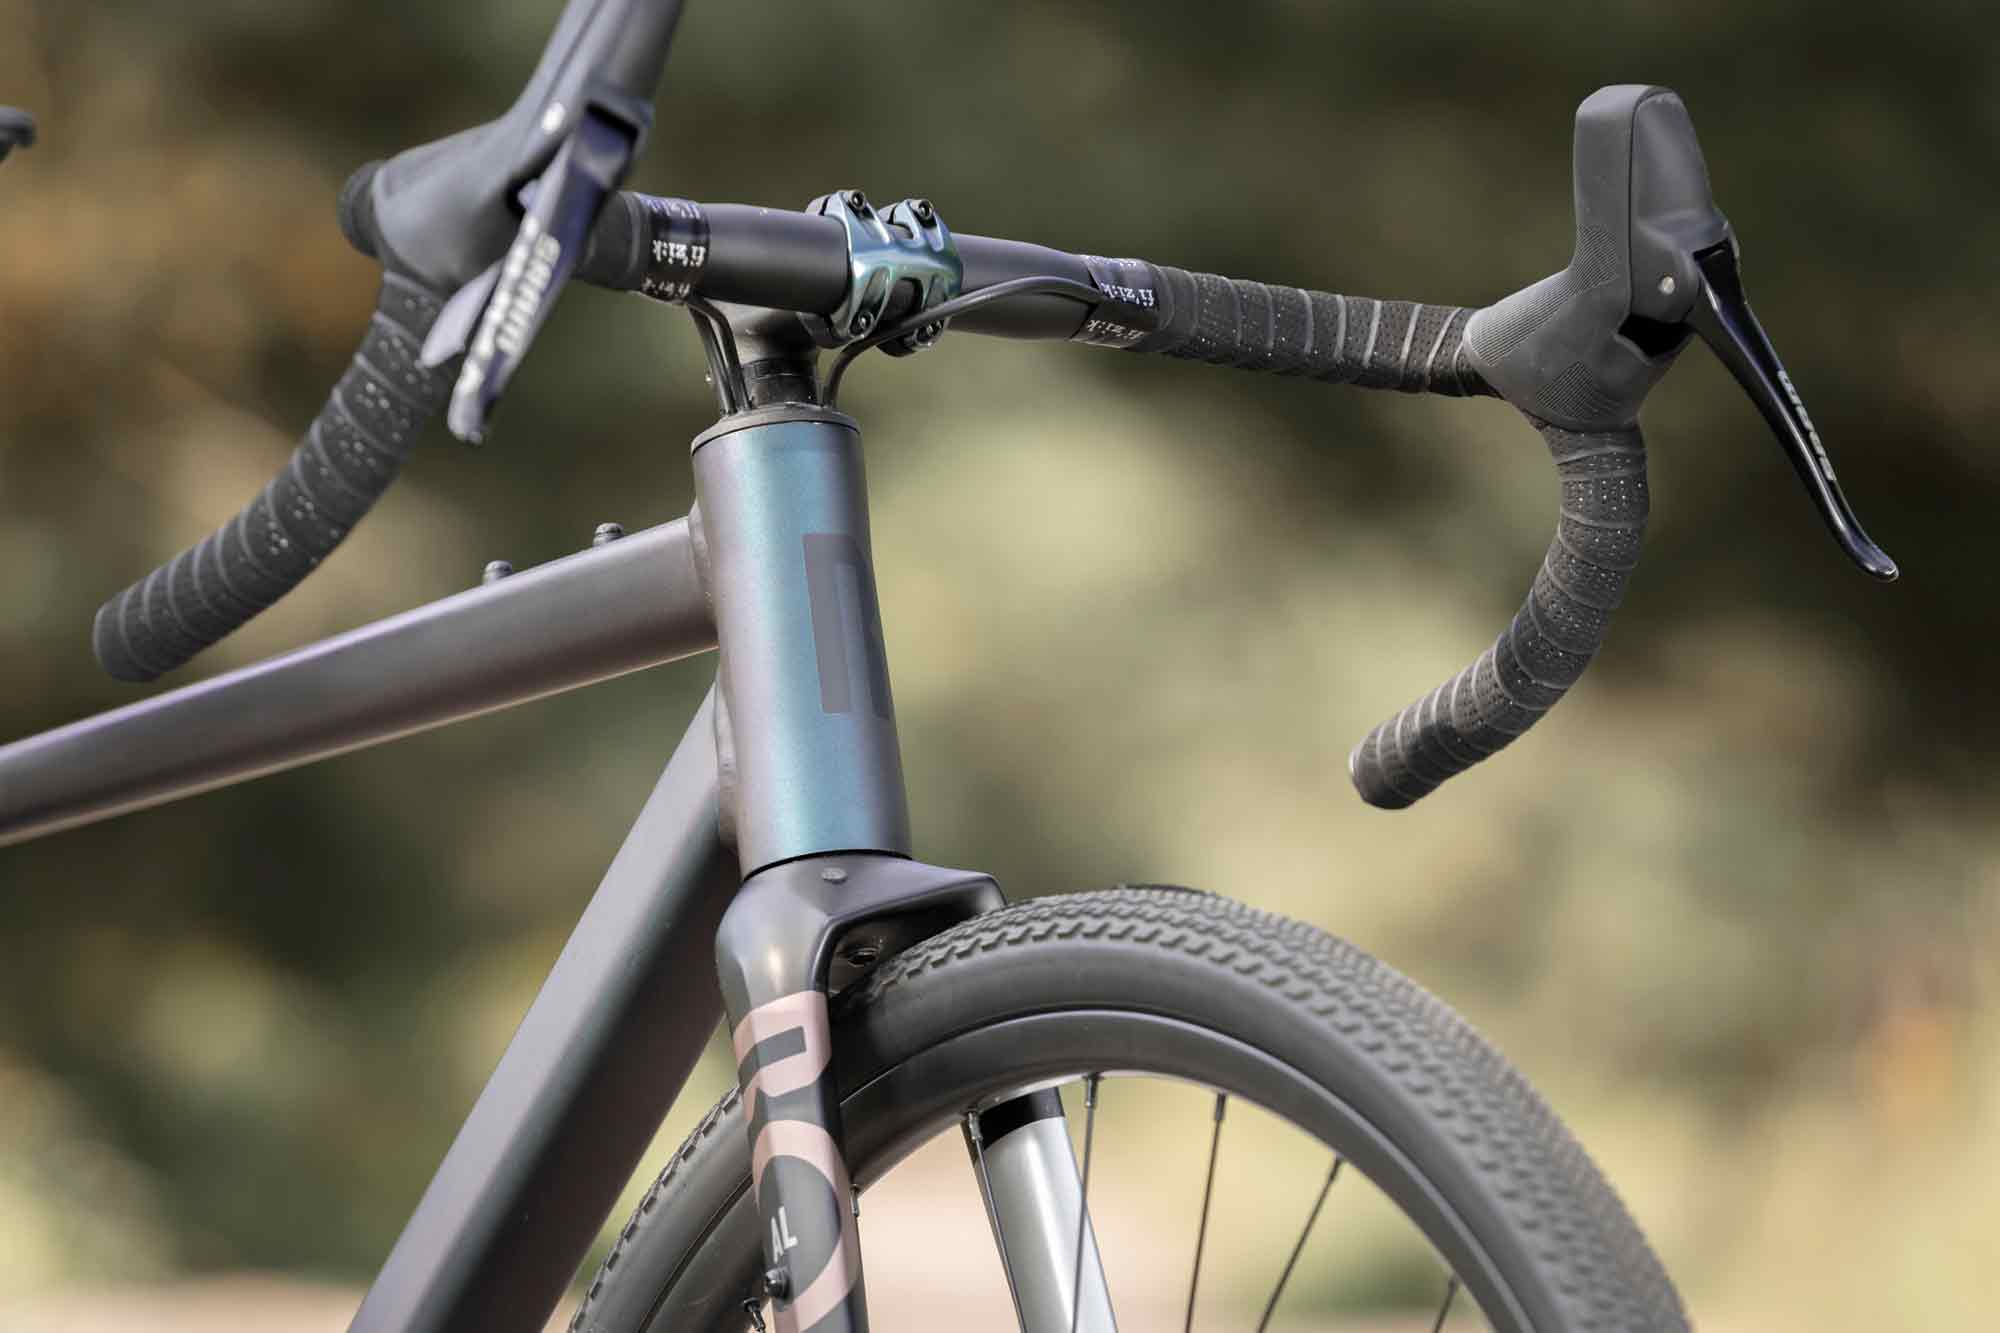 The design of a gravel bike could hardly be much cleaner, could it?